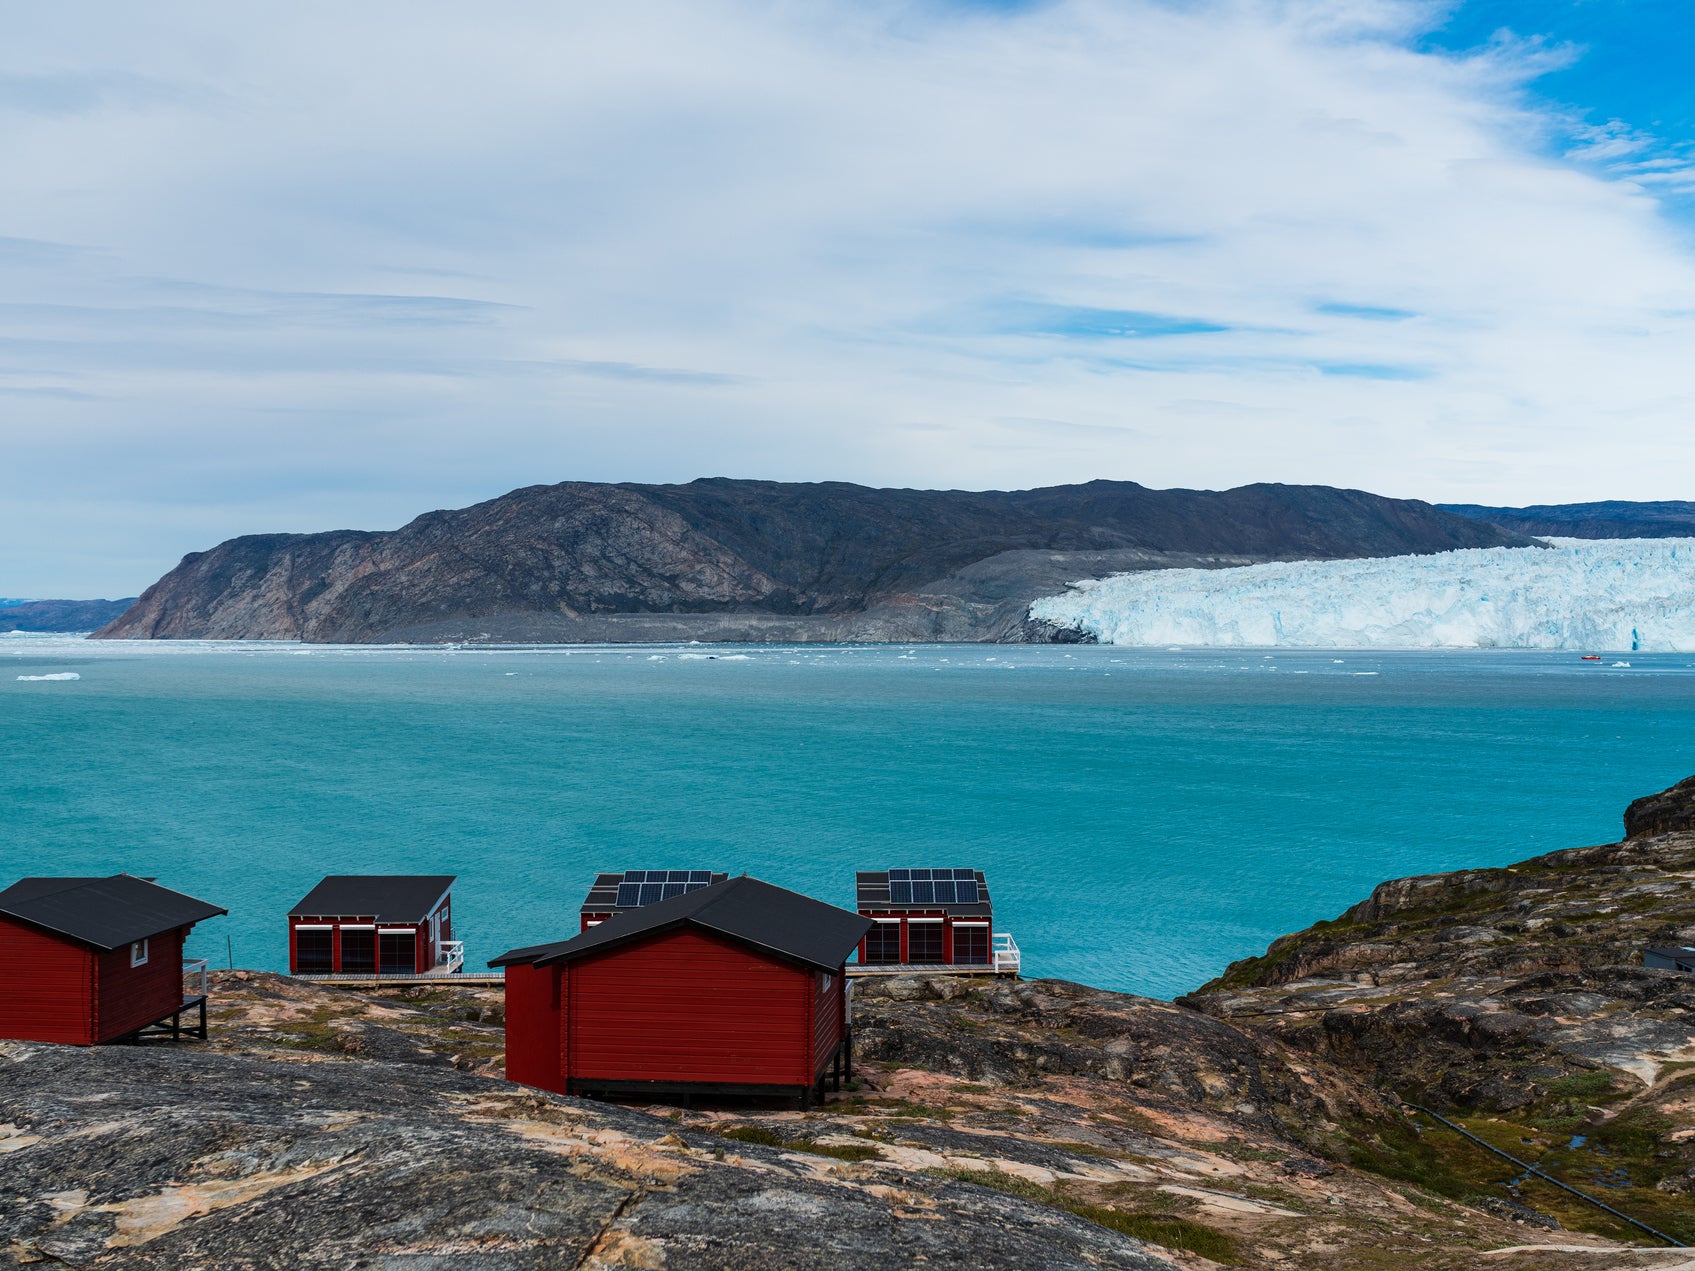 Greenland's famous Eqi glacier. The ice sheet covering most of the island contains enough ice to raise global sea levels by over 7 metres if it all melted